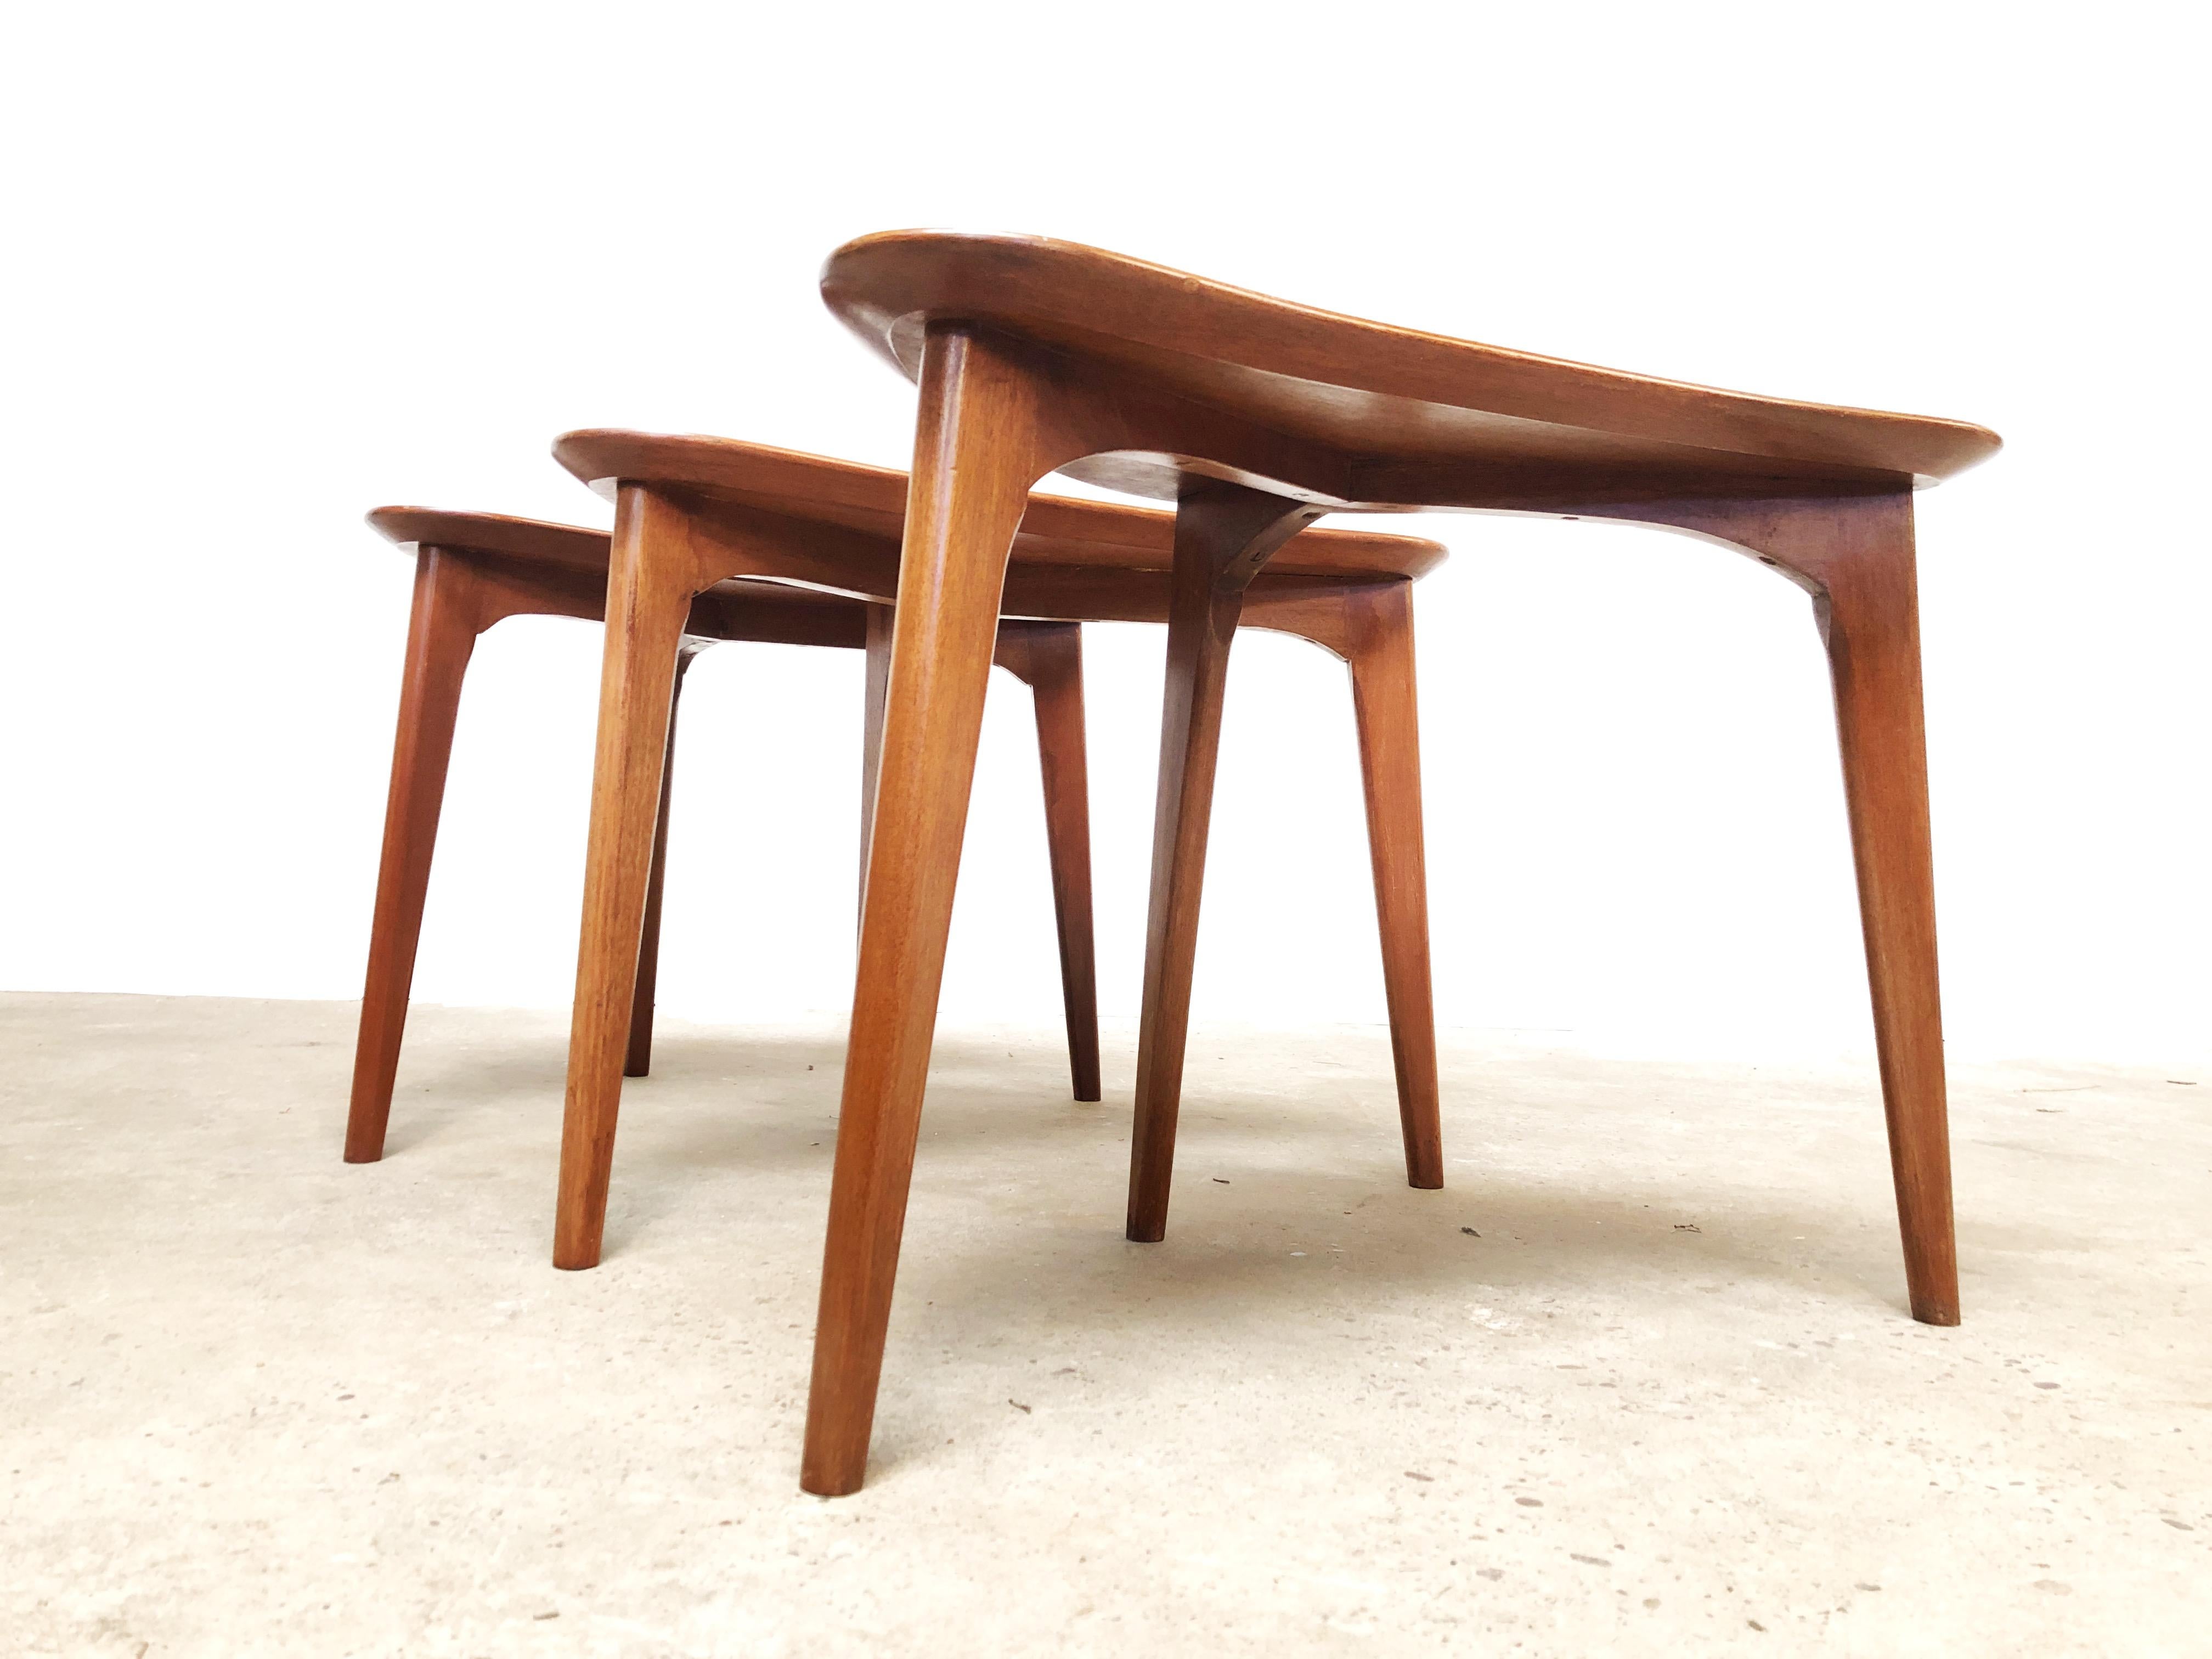 Teak boomerang offee tables. 

3 x coffee / occasional tables from the midcentury. Price for a set of 3.

Danish. Made with teak. Boomerang / kidney design.